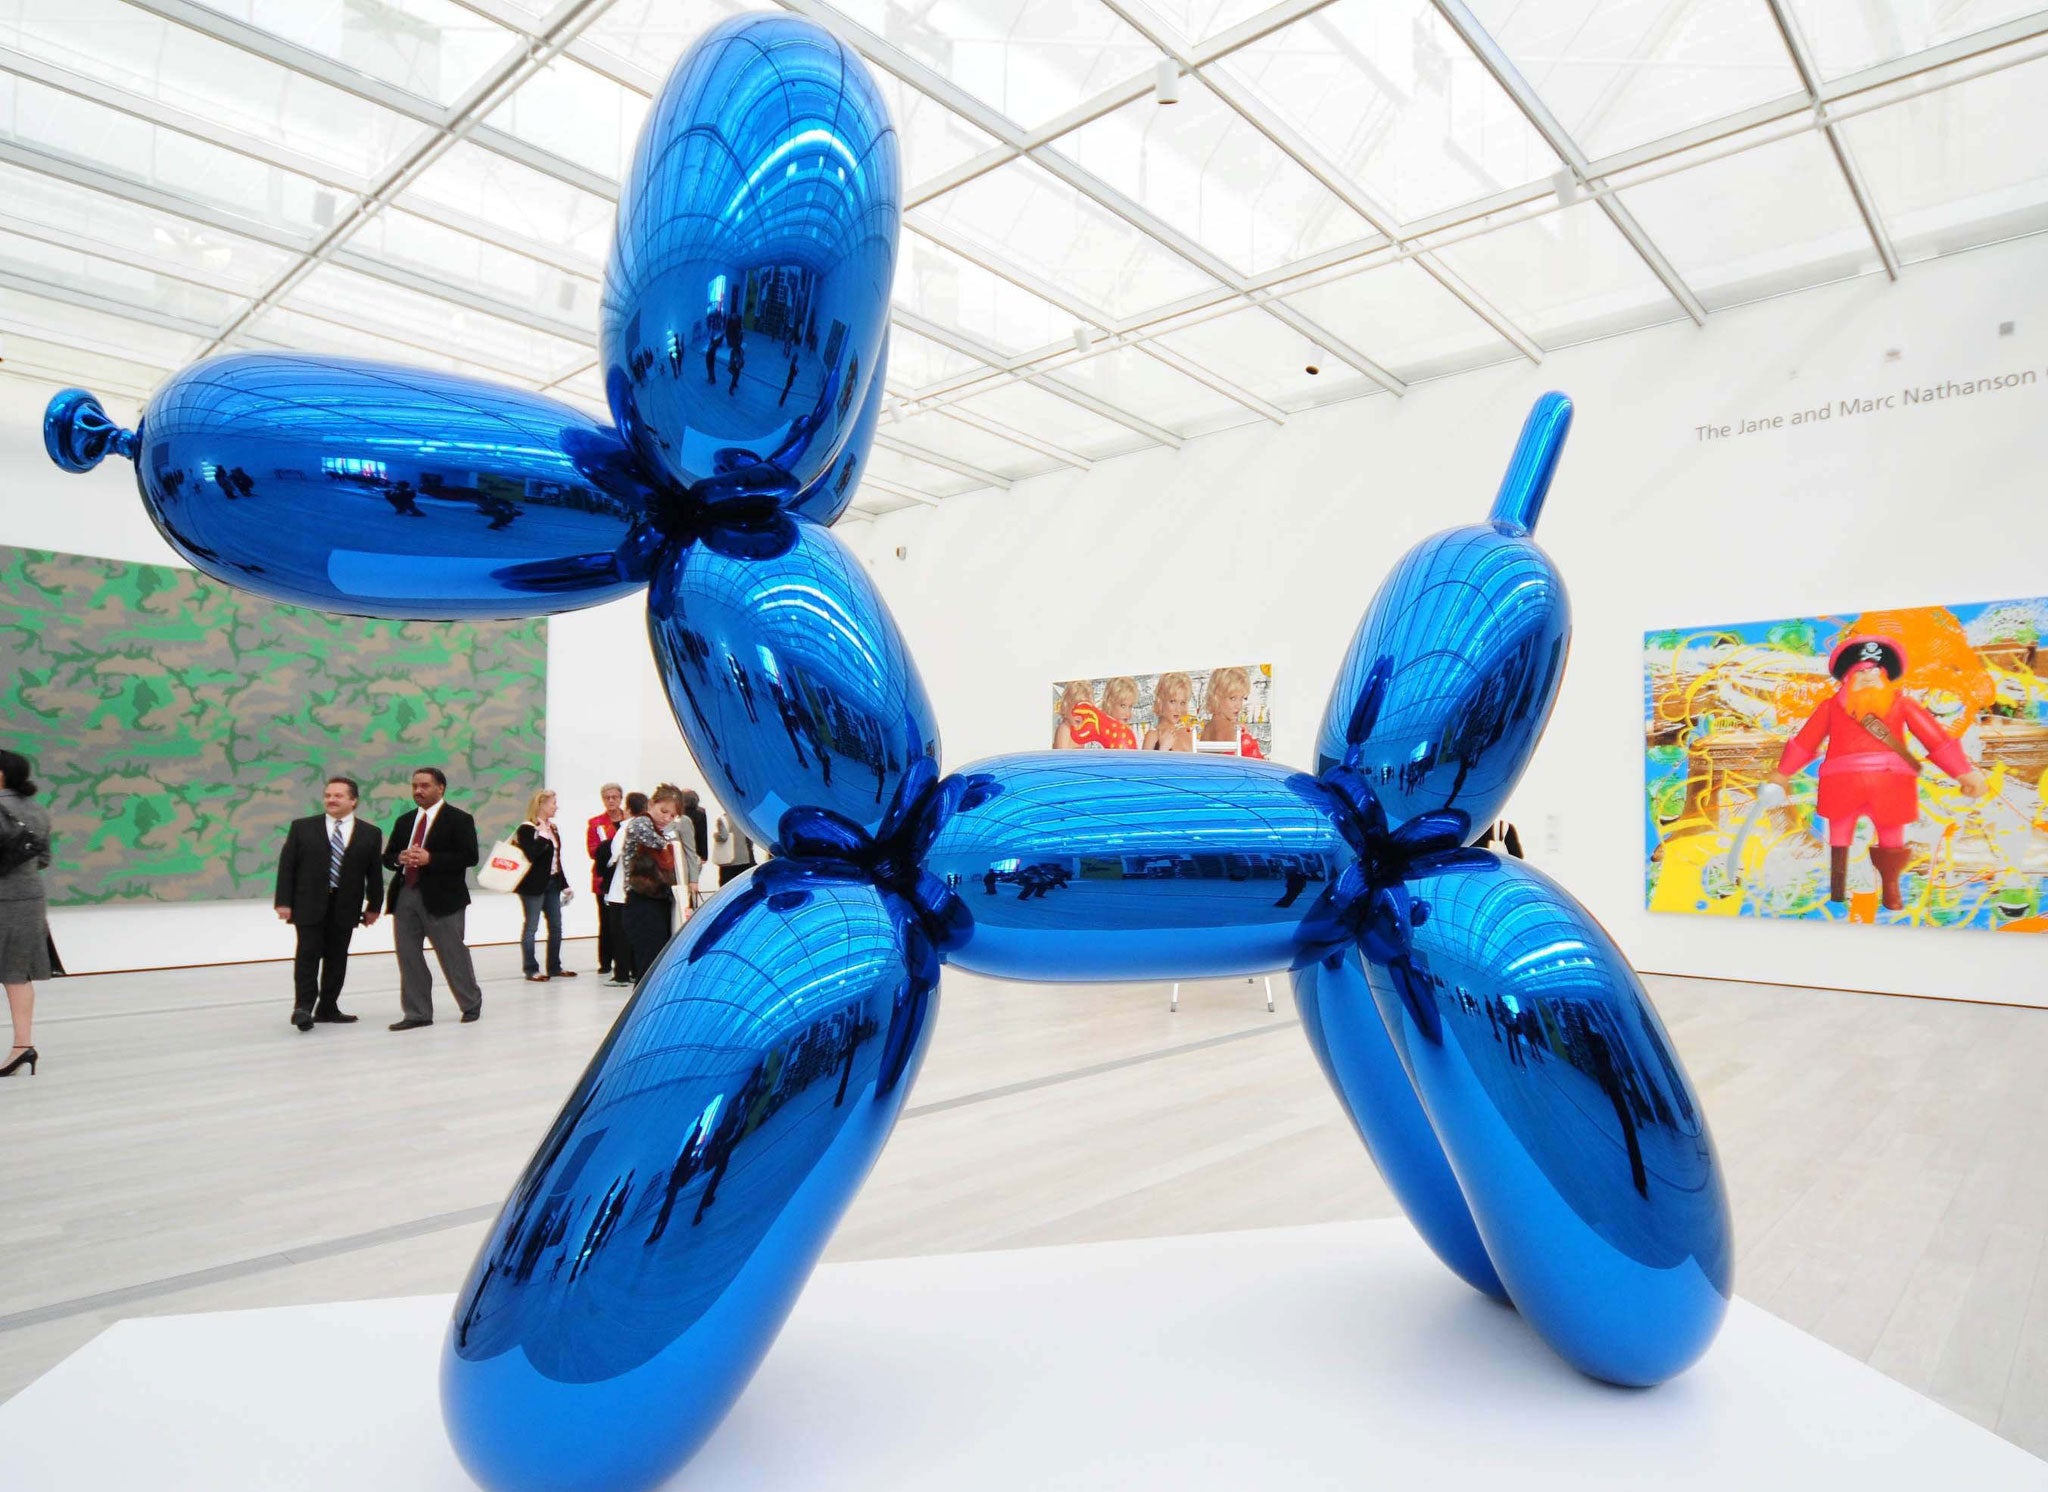 One of Jeff Koons' balloon dogs, photographed at the opening of the Broad Contemporary Art Museum, Los Angeles, 7 Feb 2008